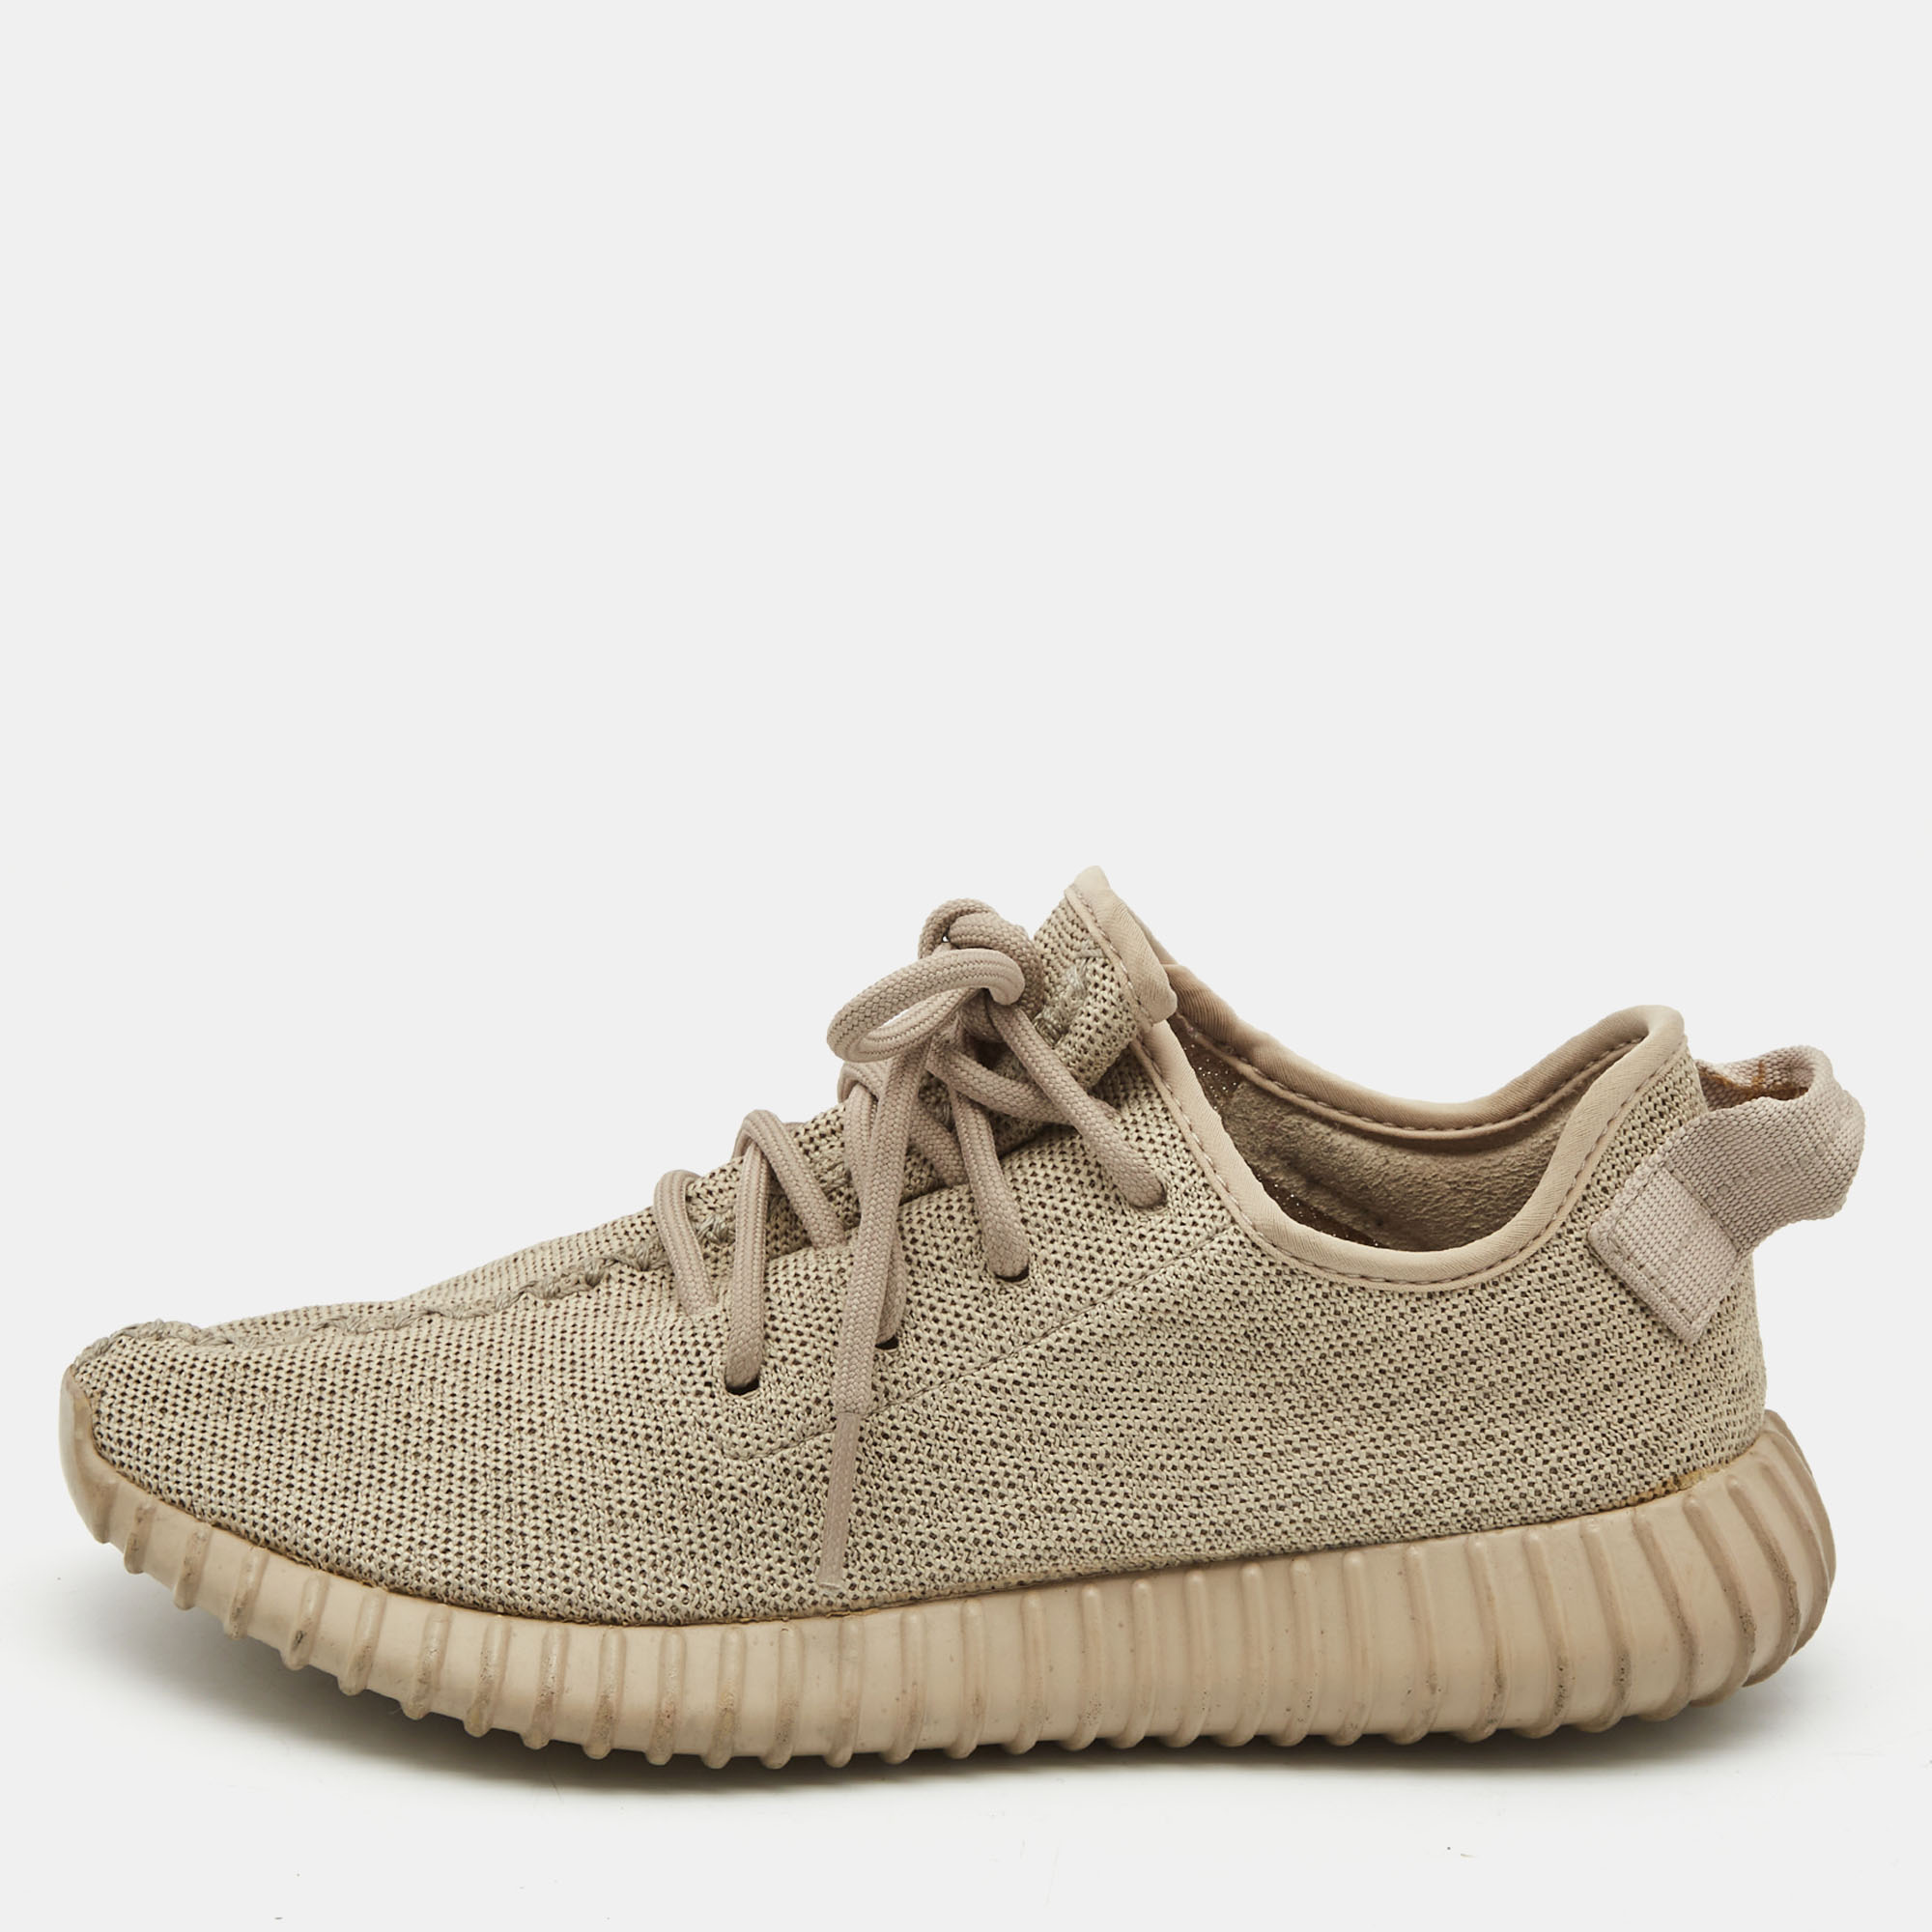 Pre-owned Yeezy X Adidas Beige Knit Fabric Boost 350 V2 Oxford Tan Sneakers Size 39 1/3